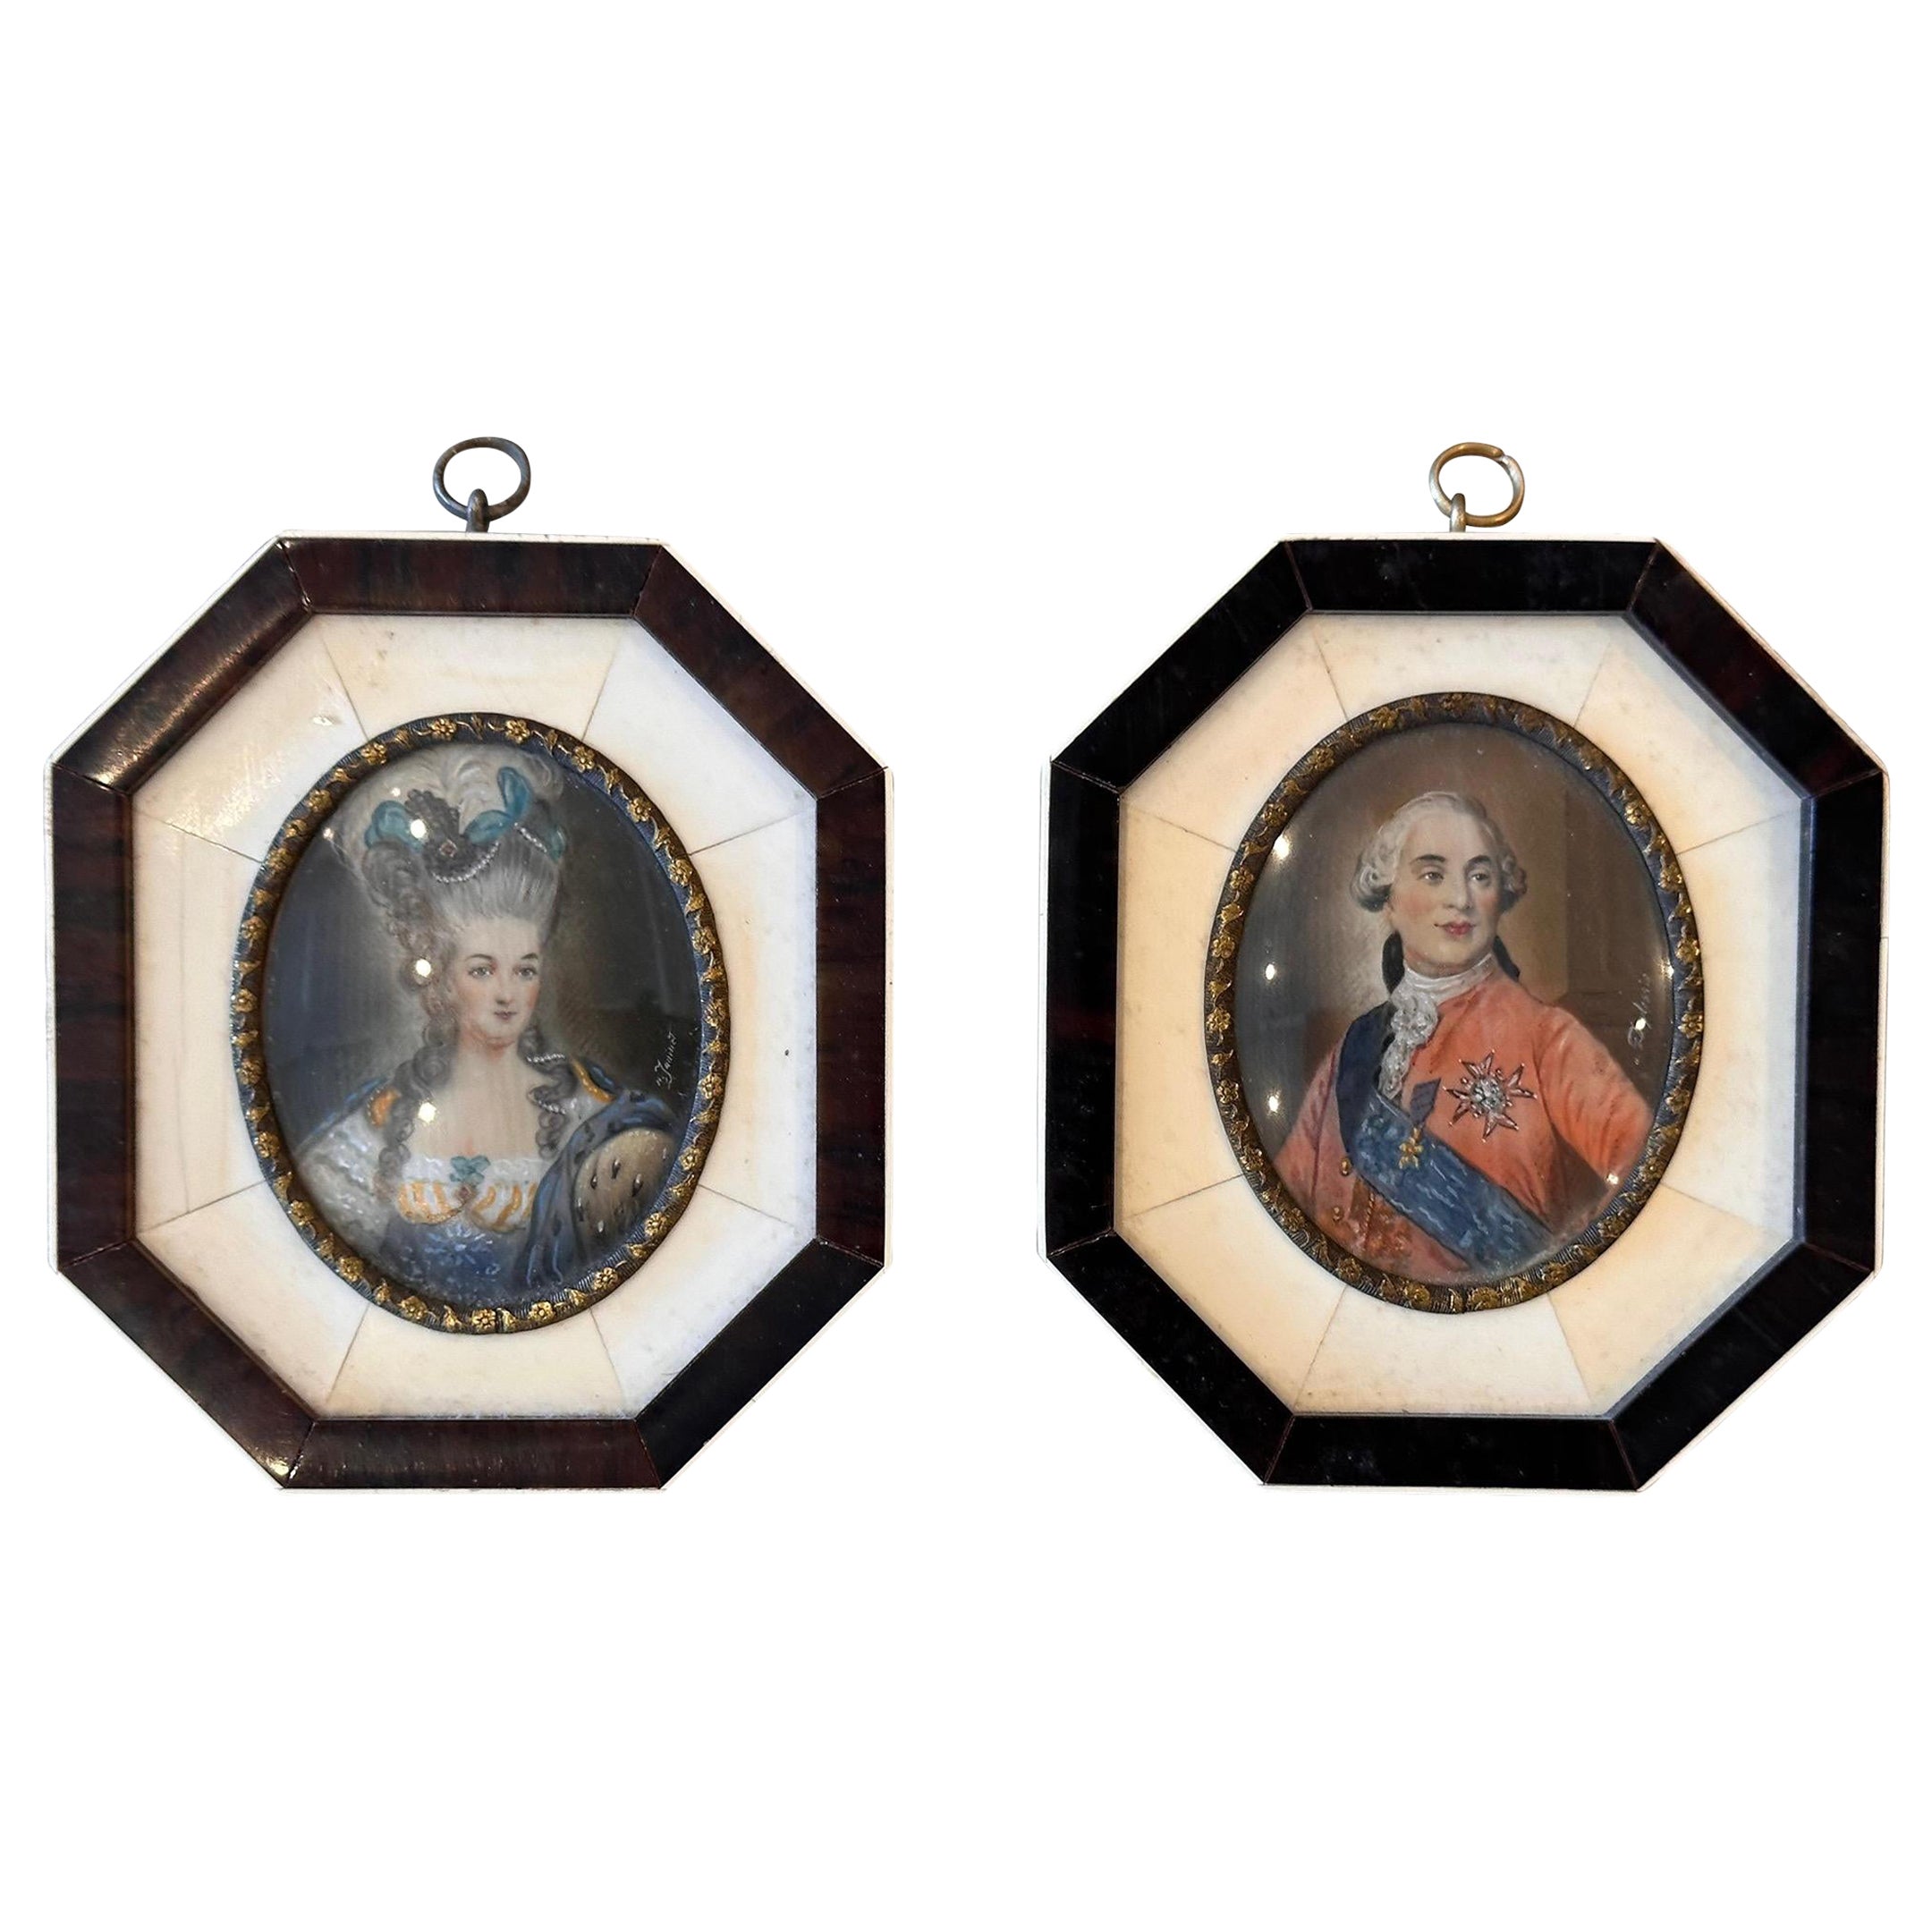 Mid 19th Century Pair of Portraits "Marie Antoinette and Louis XVI"